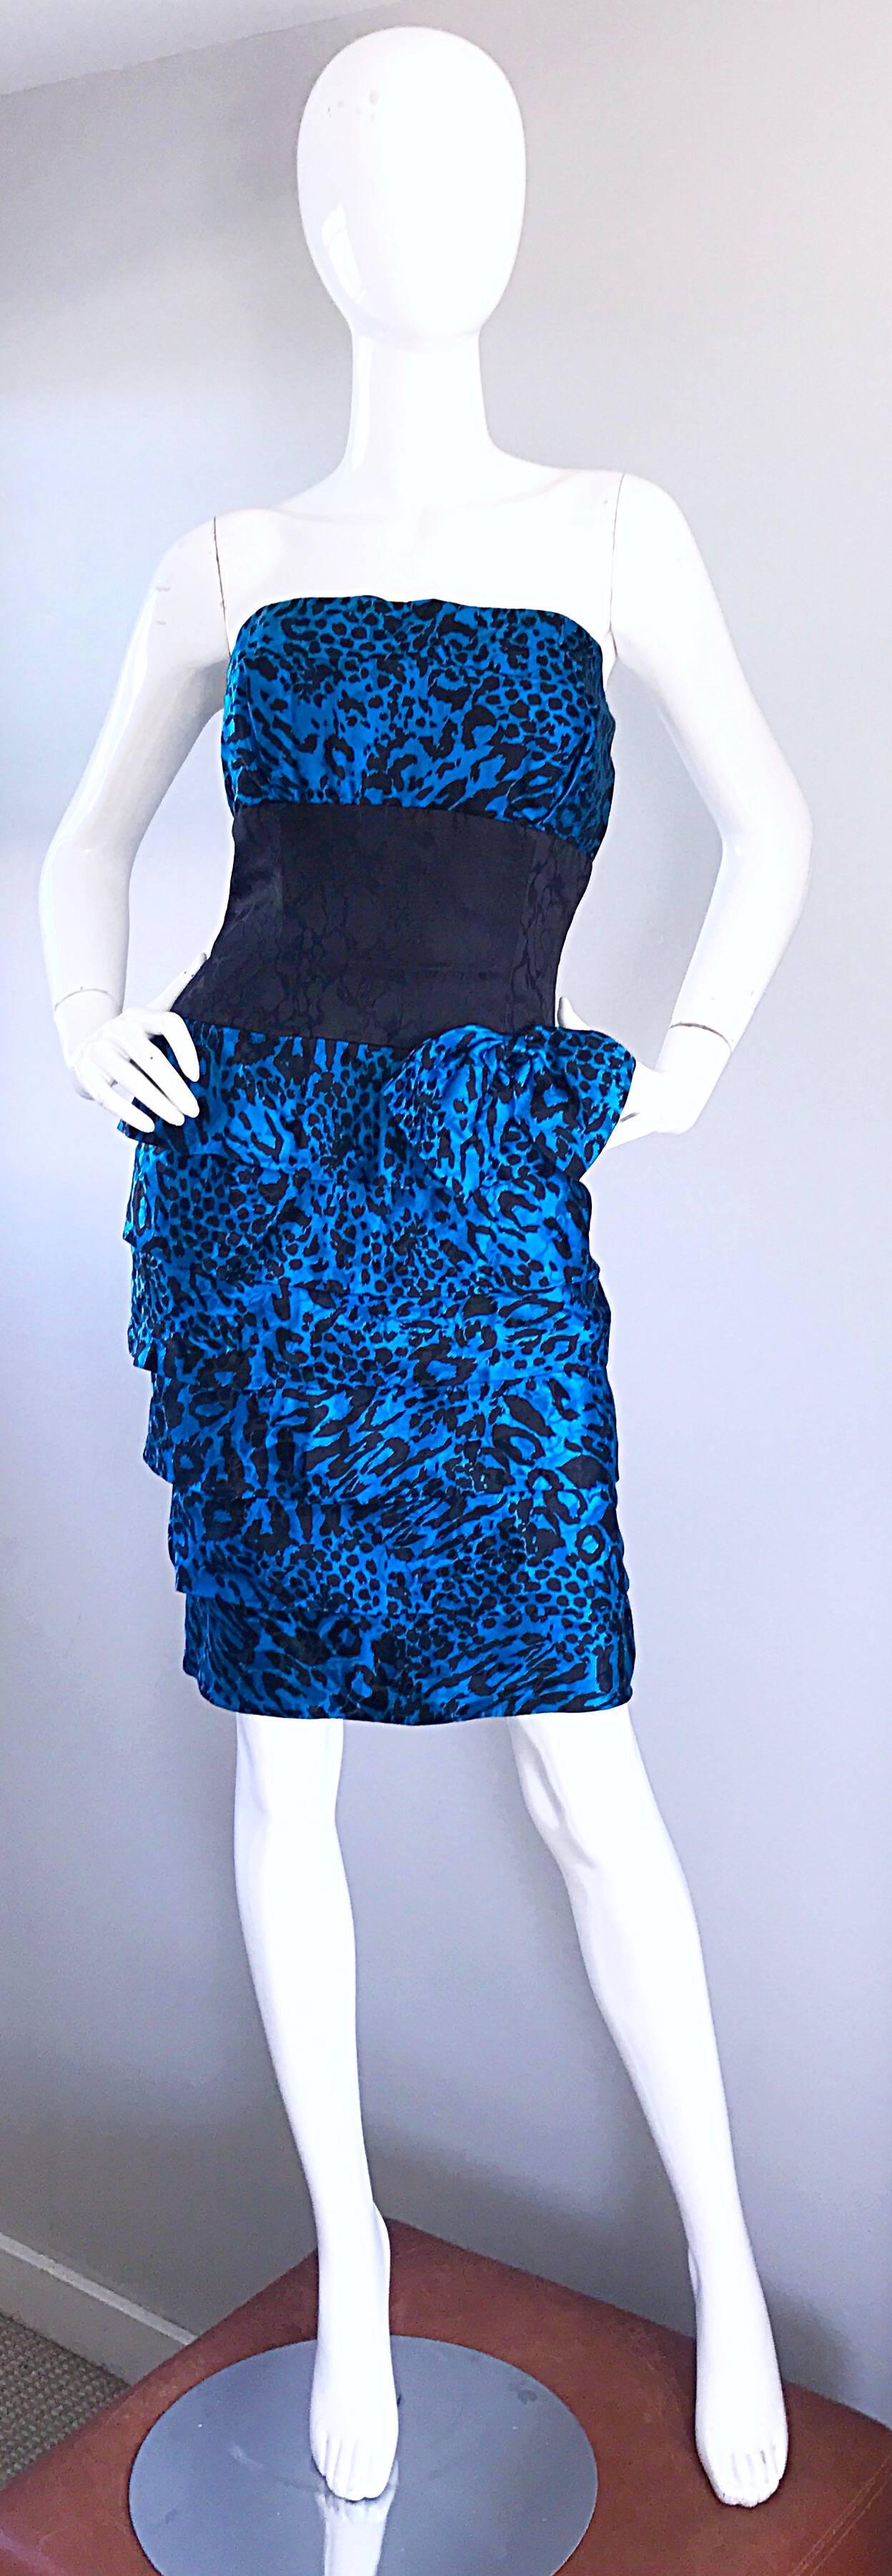 Fabulous 1980s blue and black cheetah print strapless silk dress! Features an allover animal print. Interior boned bodice holds everything in place. Fitted bodice, with a tiered ruffle skirt. Attached side bow at left waist. Hidden zipper up the